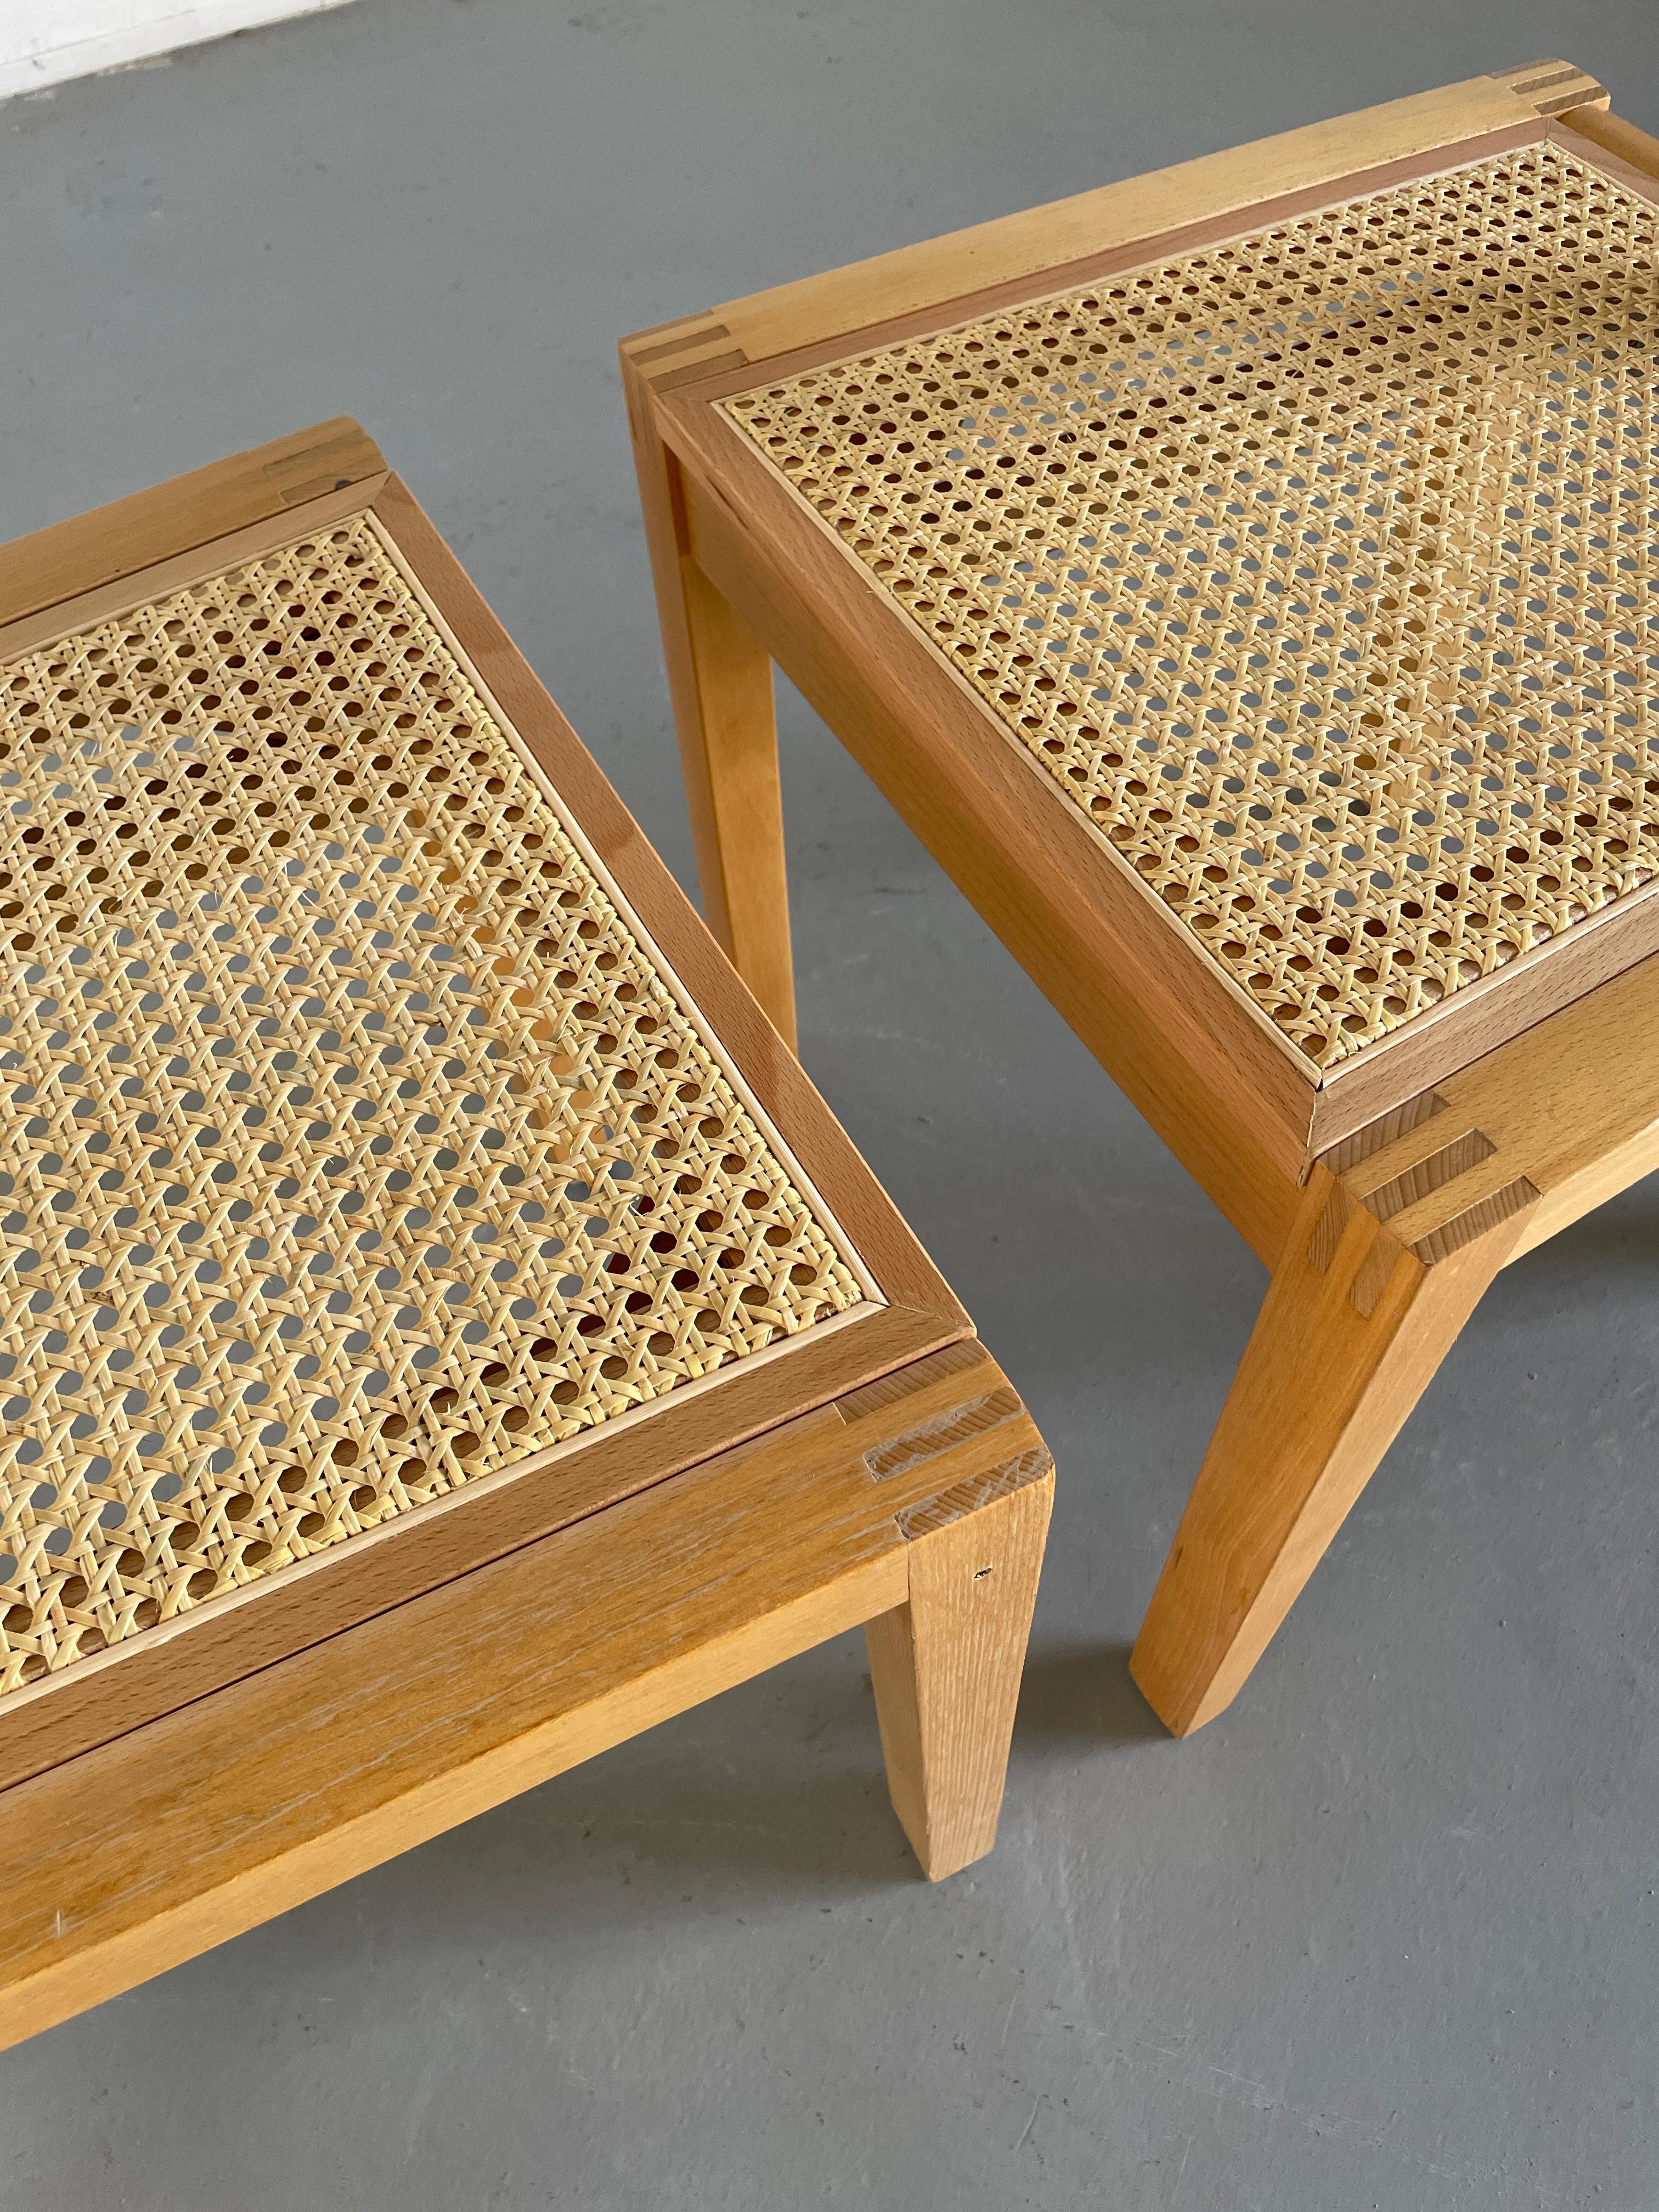 1 of 2 Vintage Postmodern Geometrical Beechwood and Cane Dining Chairs, 1990s For Sale 2